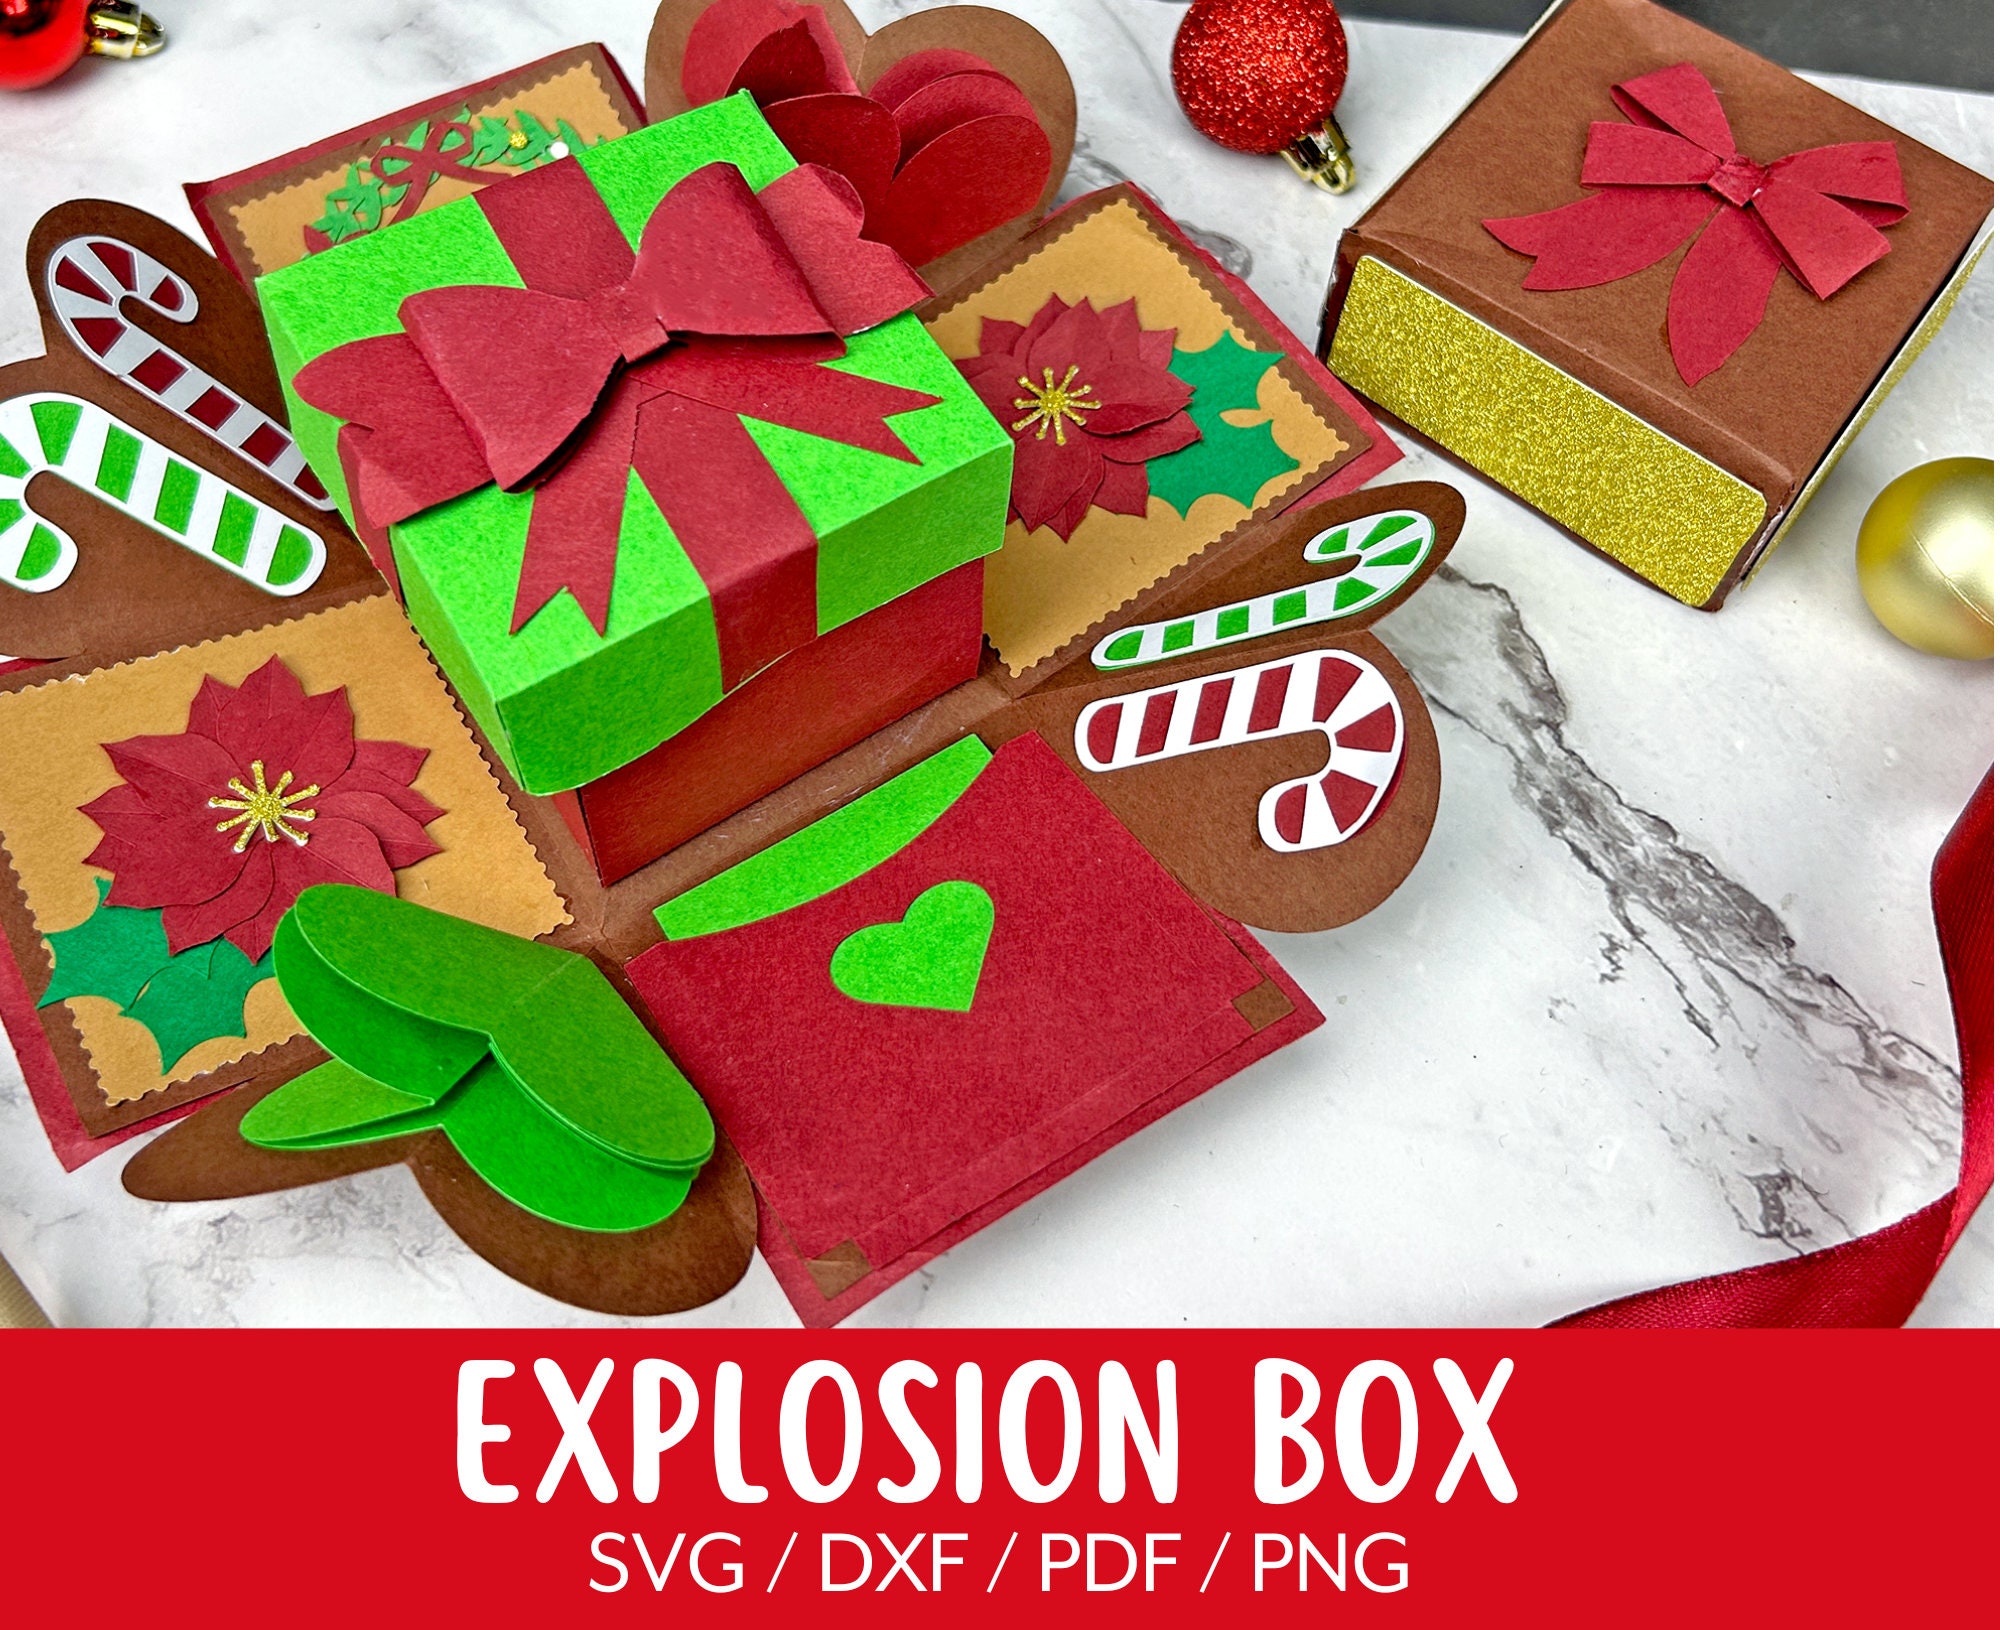 Exploding Photo Box - Personalized Exploding Picture Box – Forever